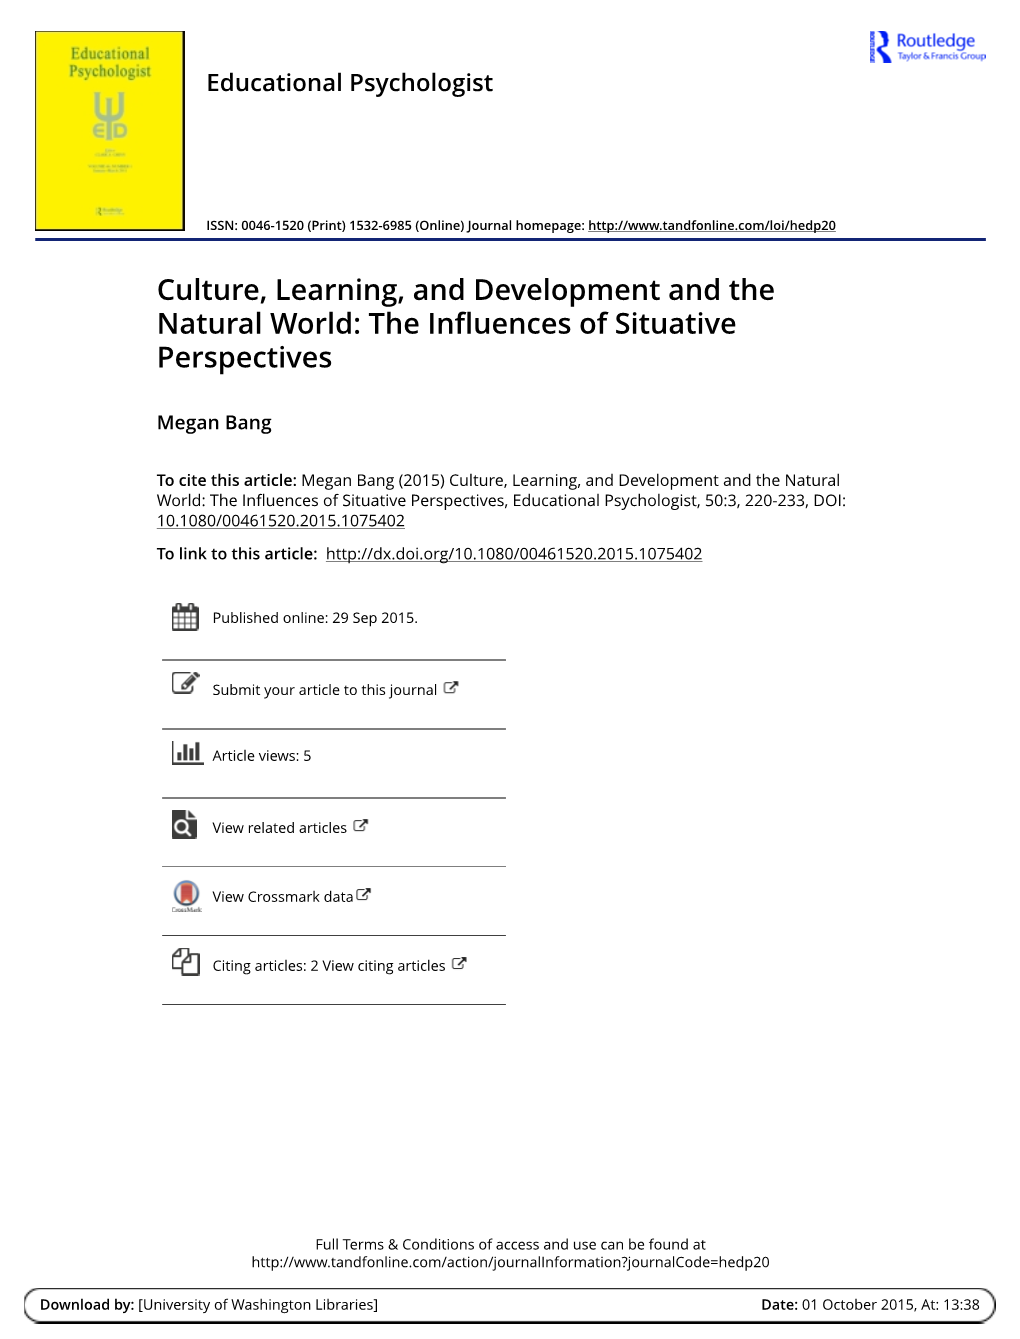 Culture, Learning, and Development and the Natural World: the Influences of Situative Perspectives